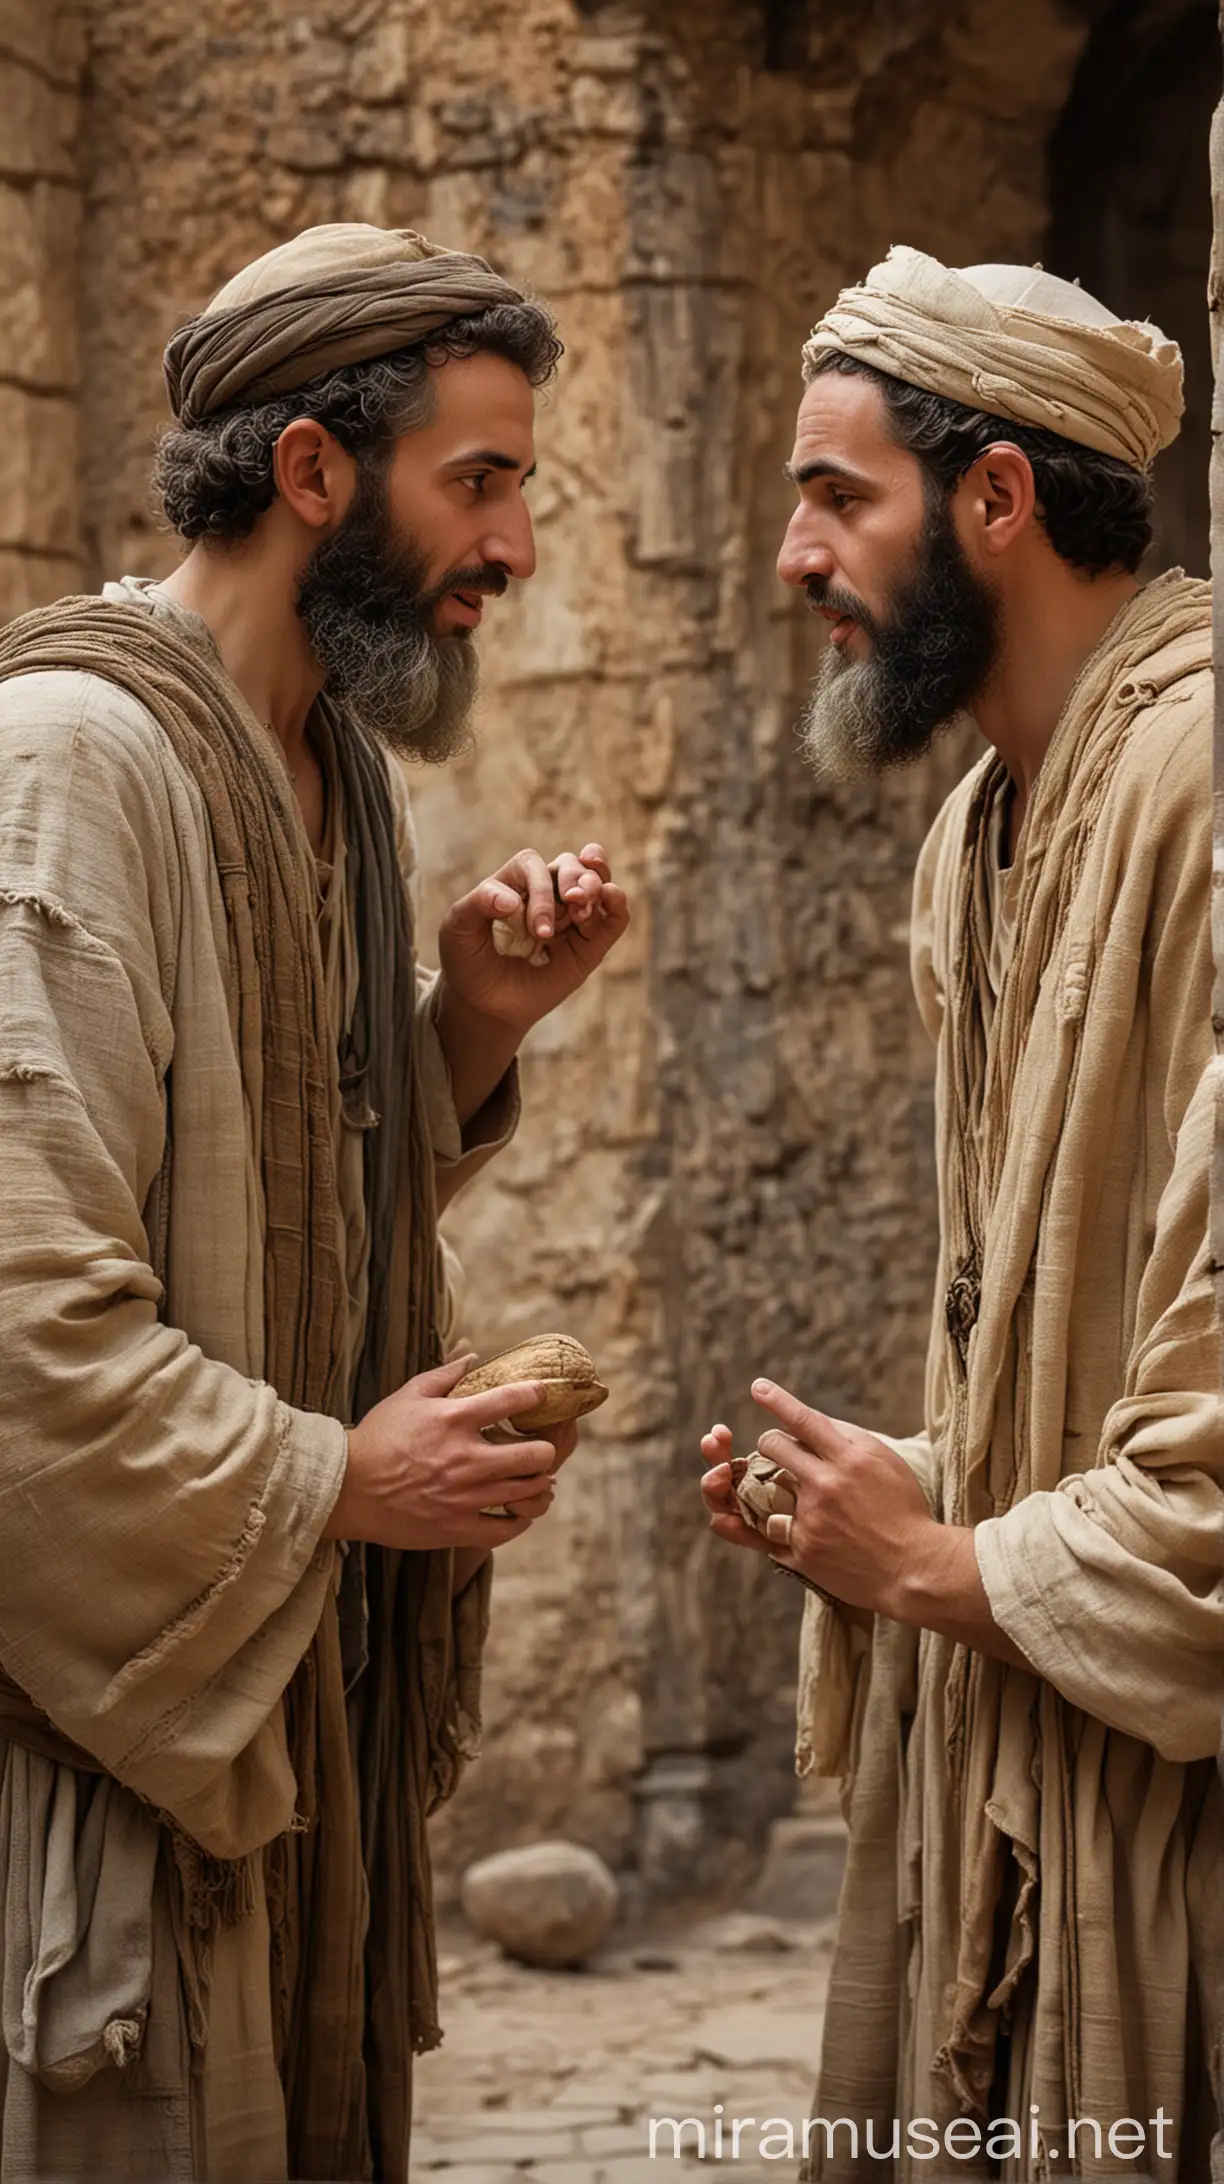 Two Jewish Men Engaged in Conversation in an Ancient Setting